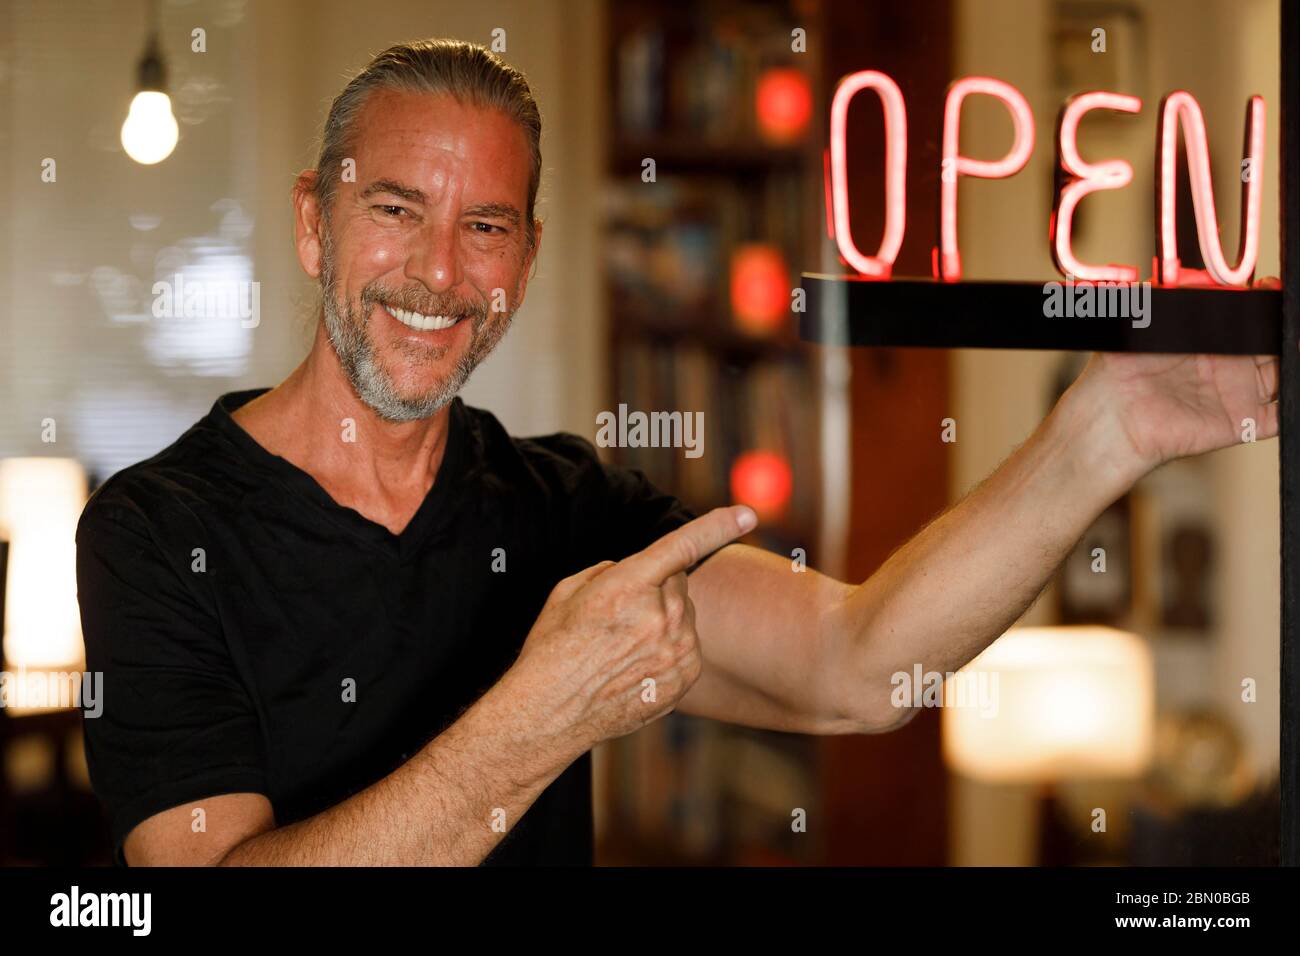 open for business concept, small business owner reopening premises after covid-19 virus pandemic, happy man pointing to red neon open sign cafe bar Stock Photo